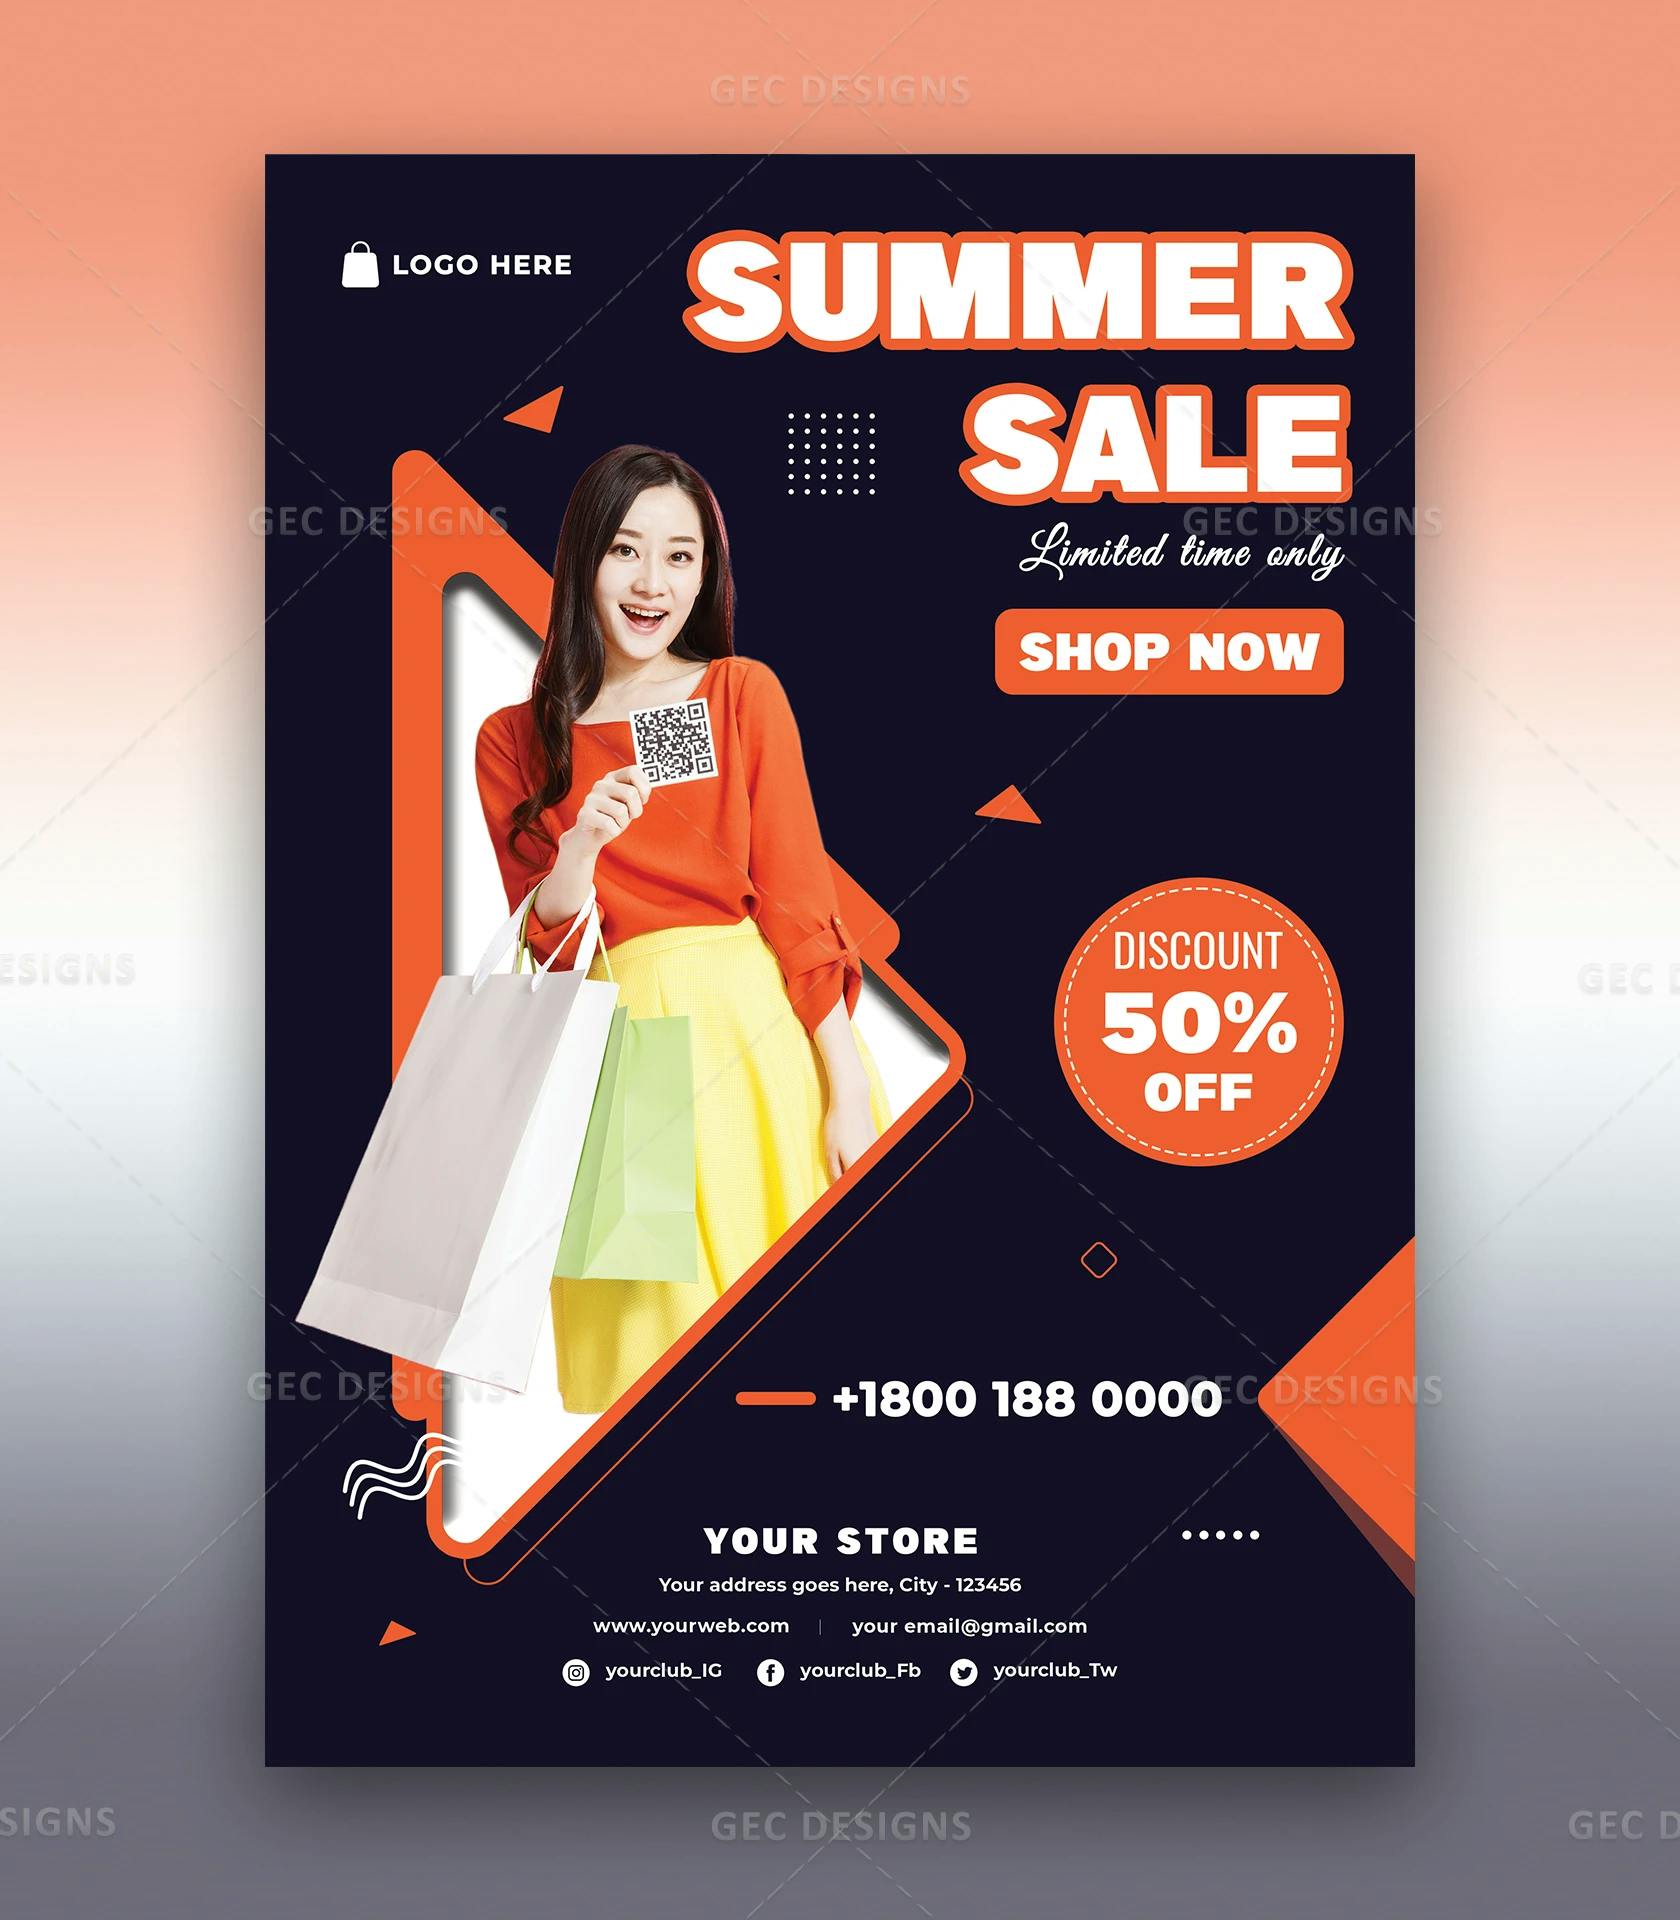 Summer Sale Bonanza | Flyer Template for Exclusive Promotions